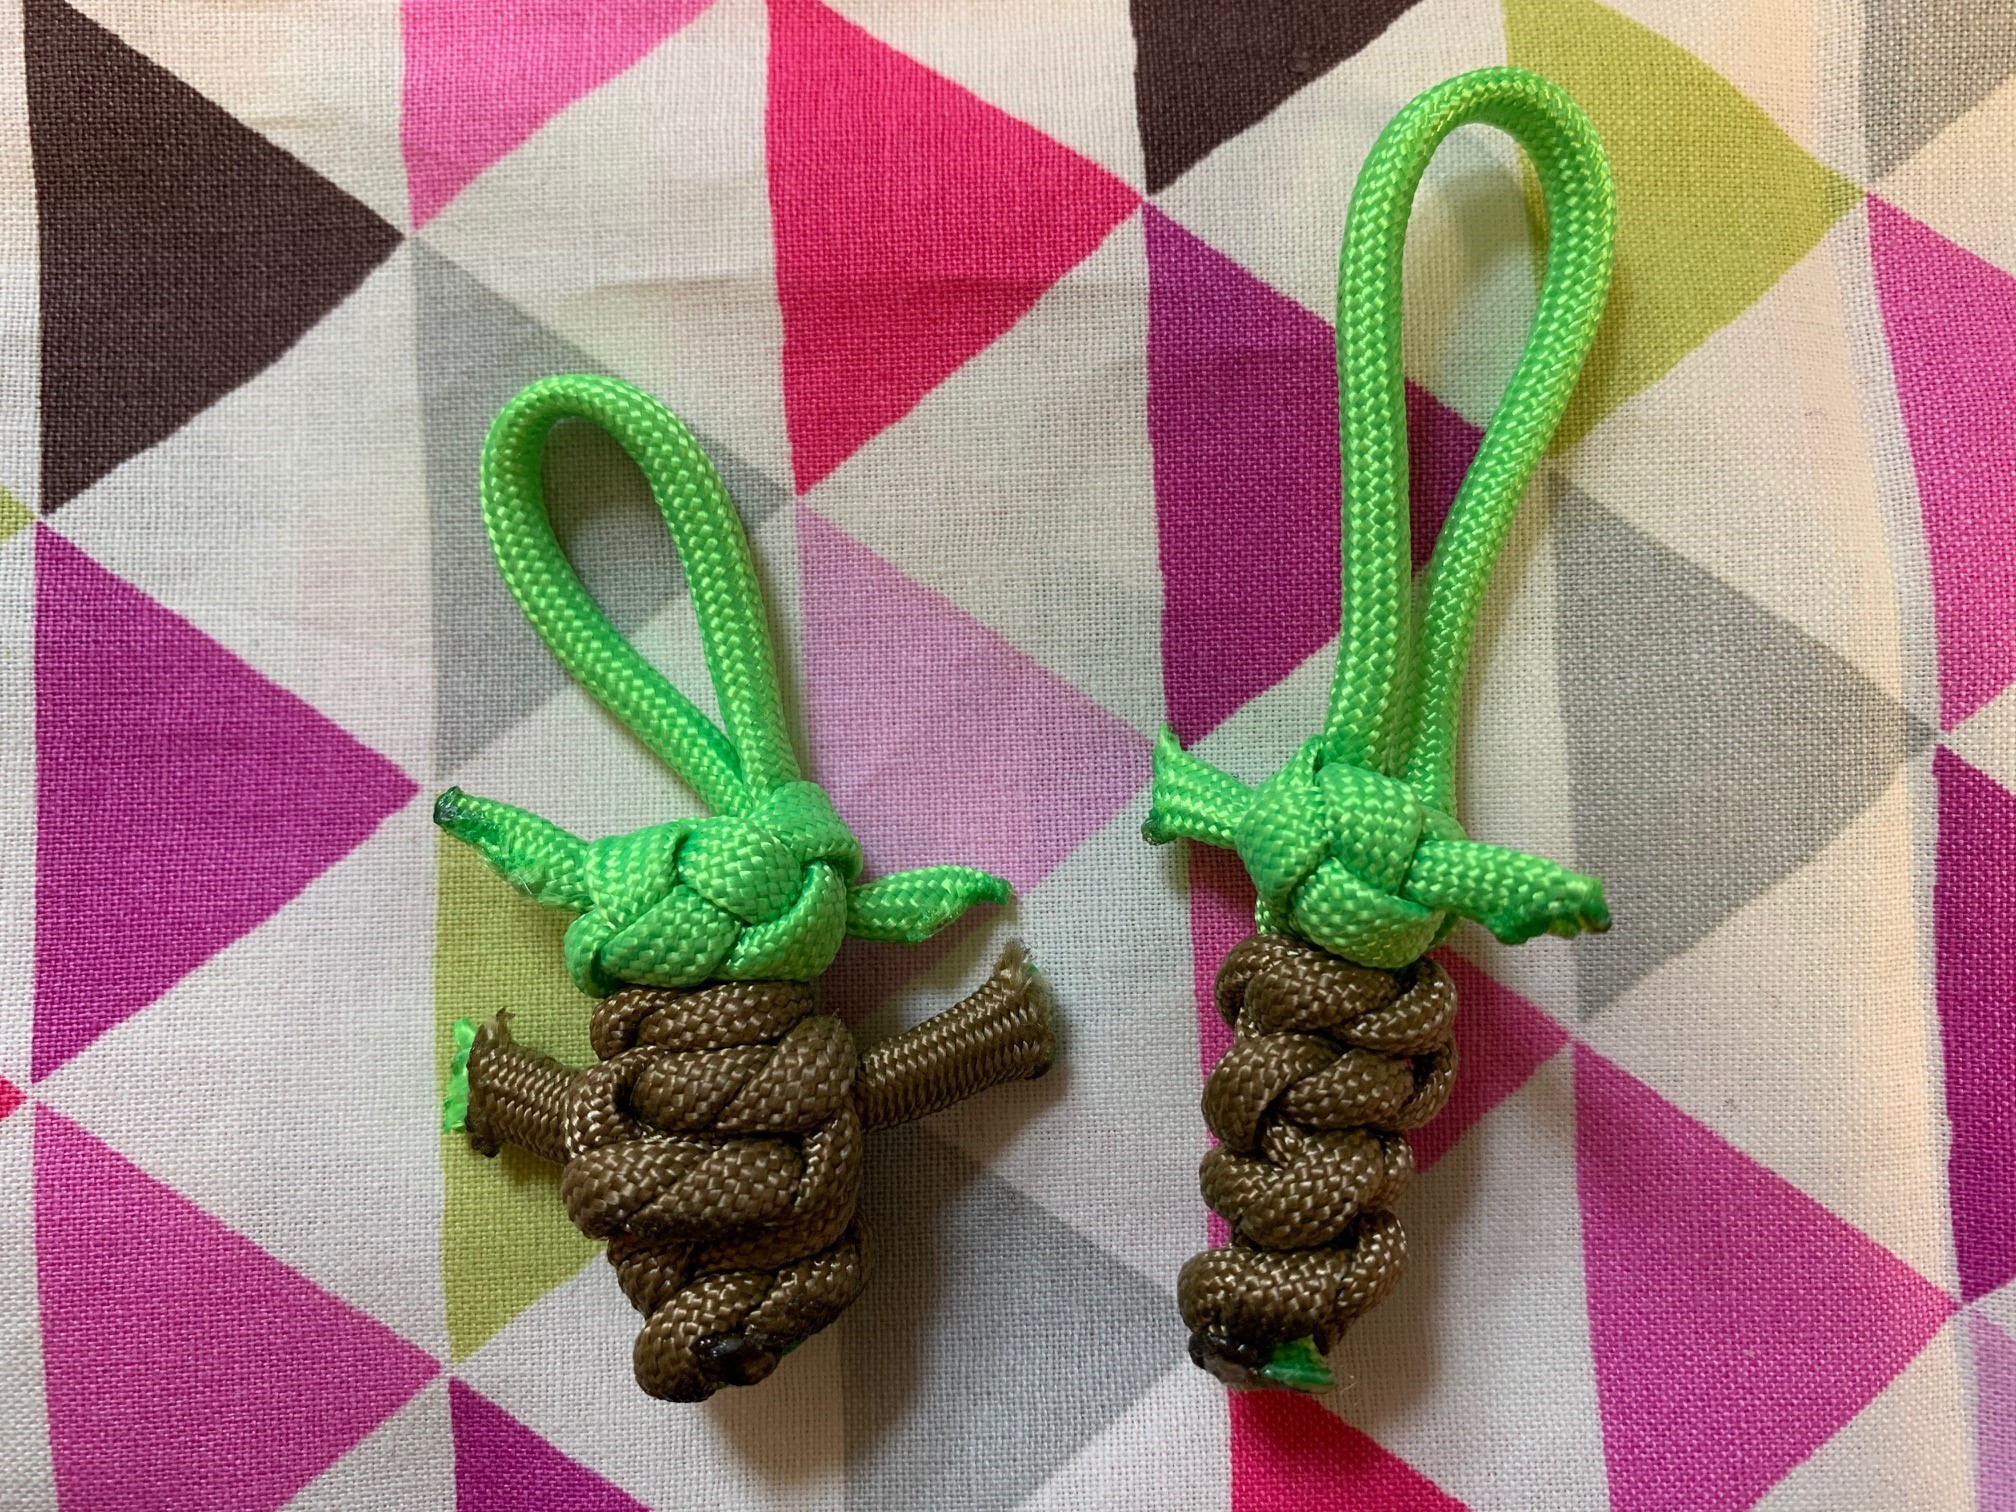 two baby yoda keychains made from green and brown paracord